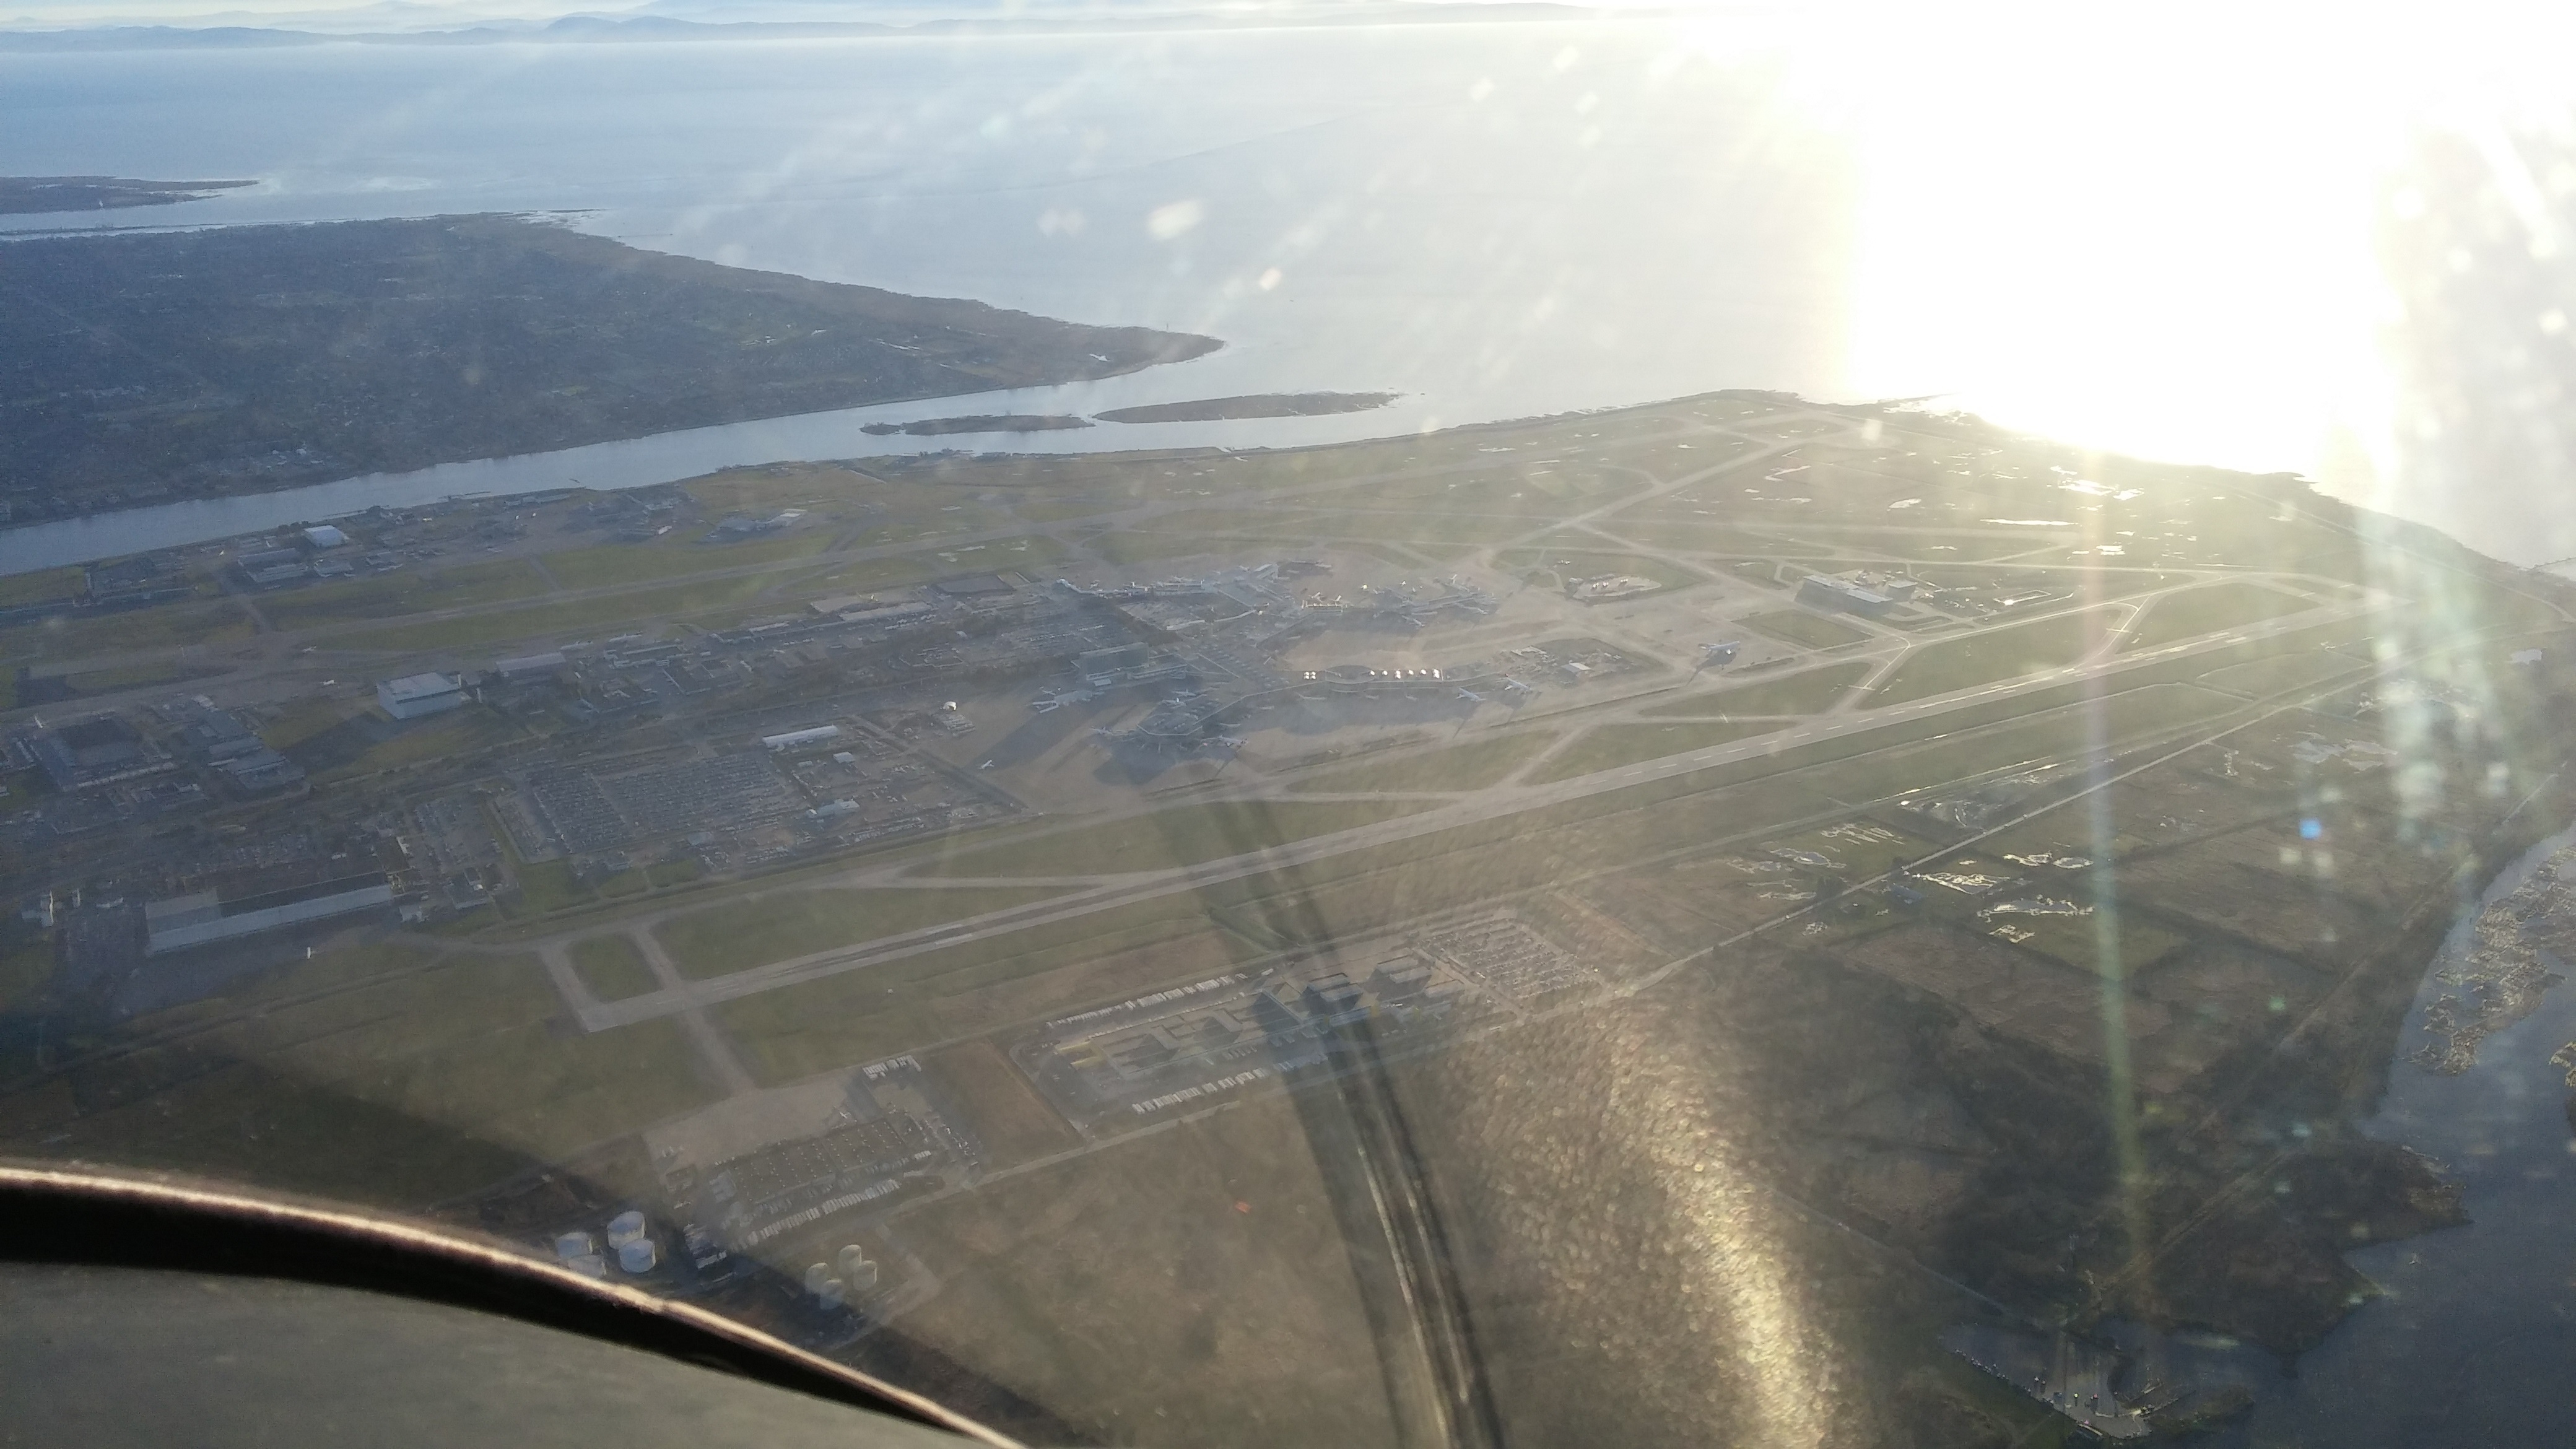 Blurry shot passing over YVR